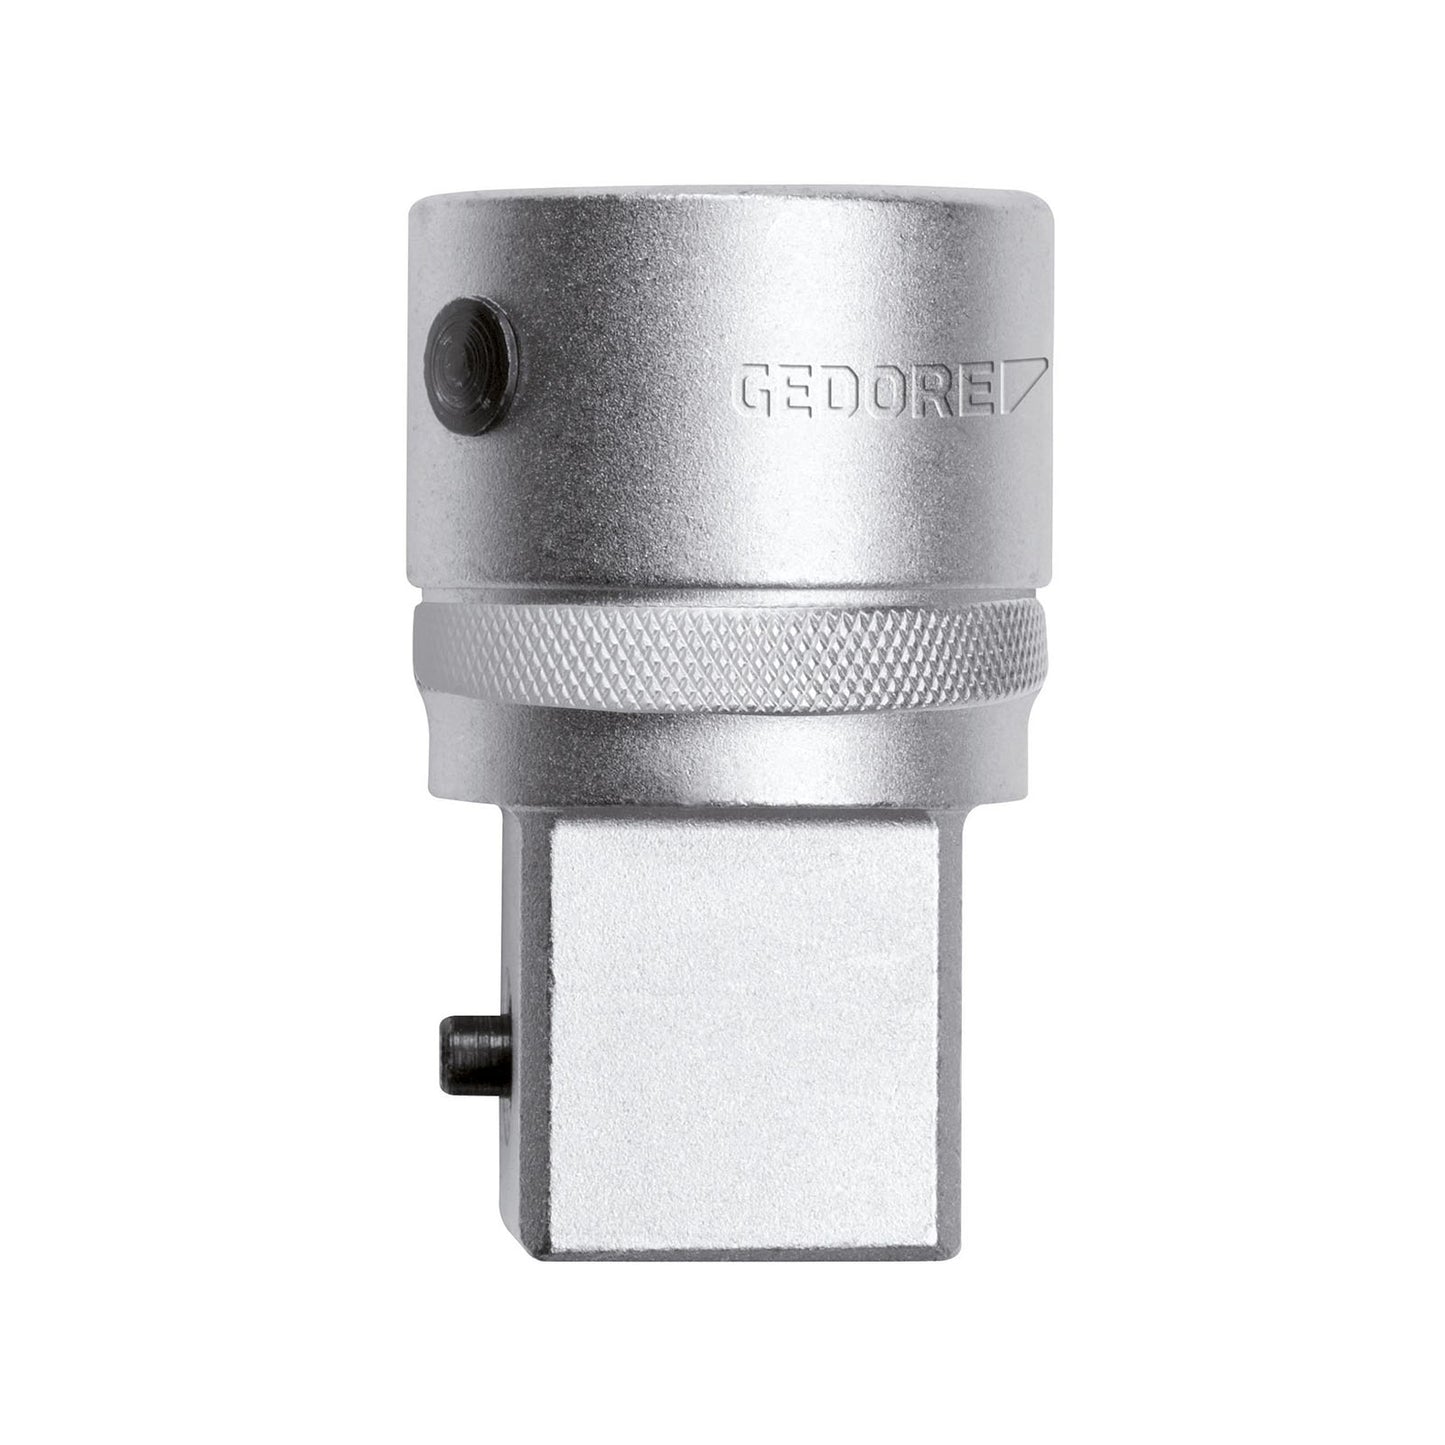 GEDORE red R77300011 - Adapter 3/4" - 1" Square / L=58 mm (3300511)